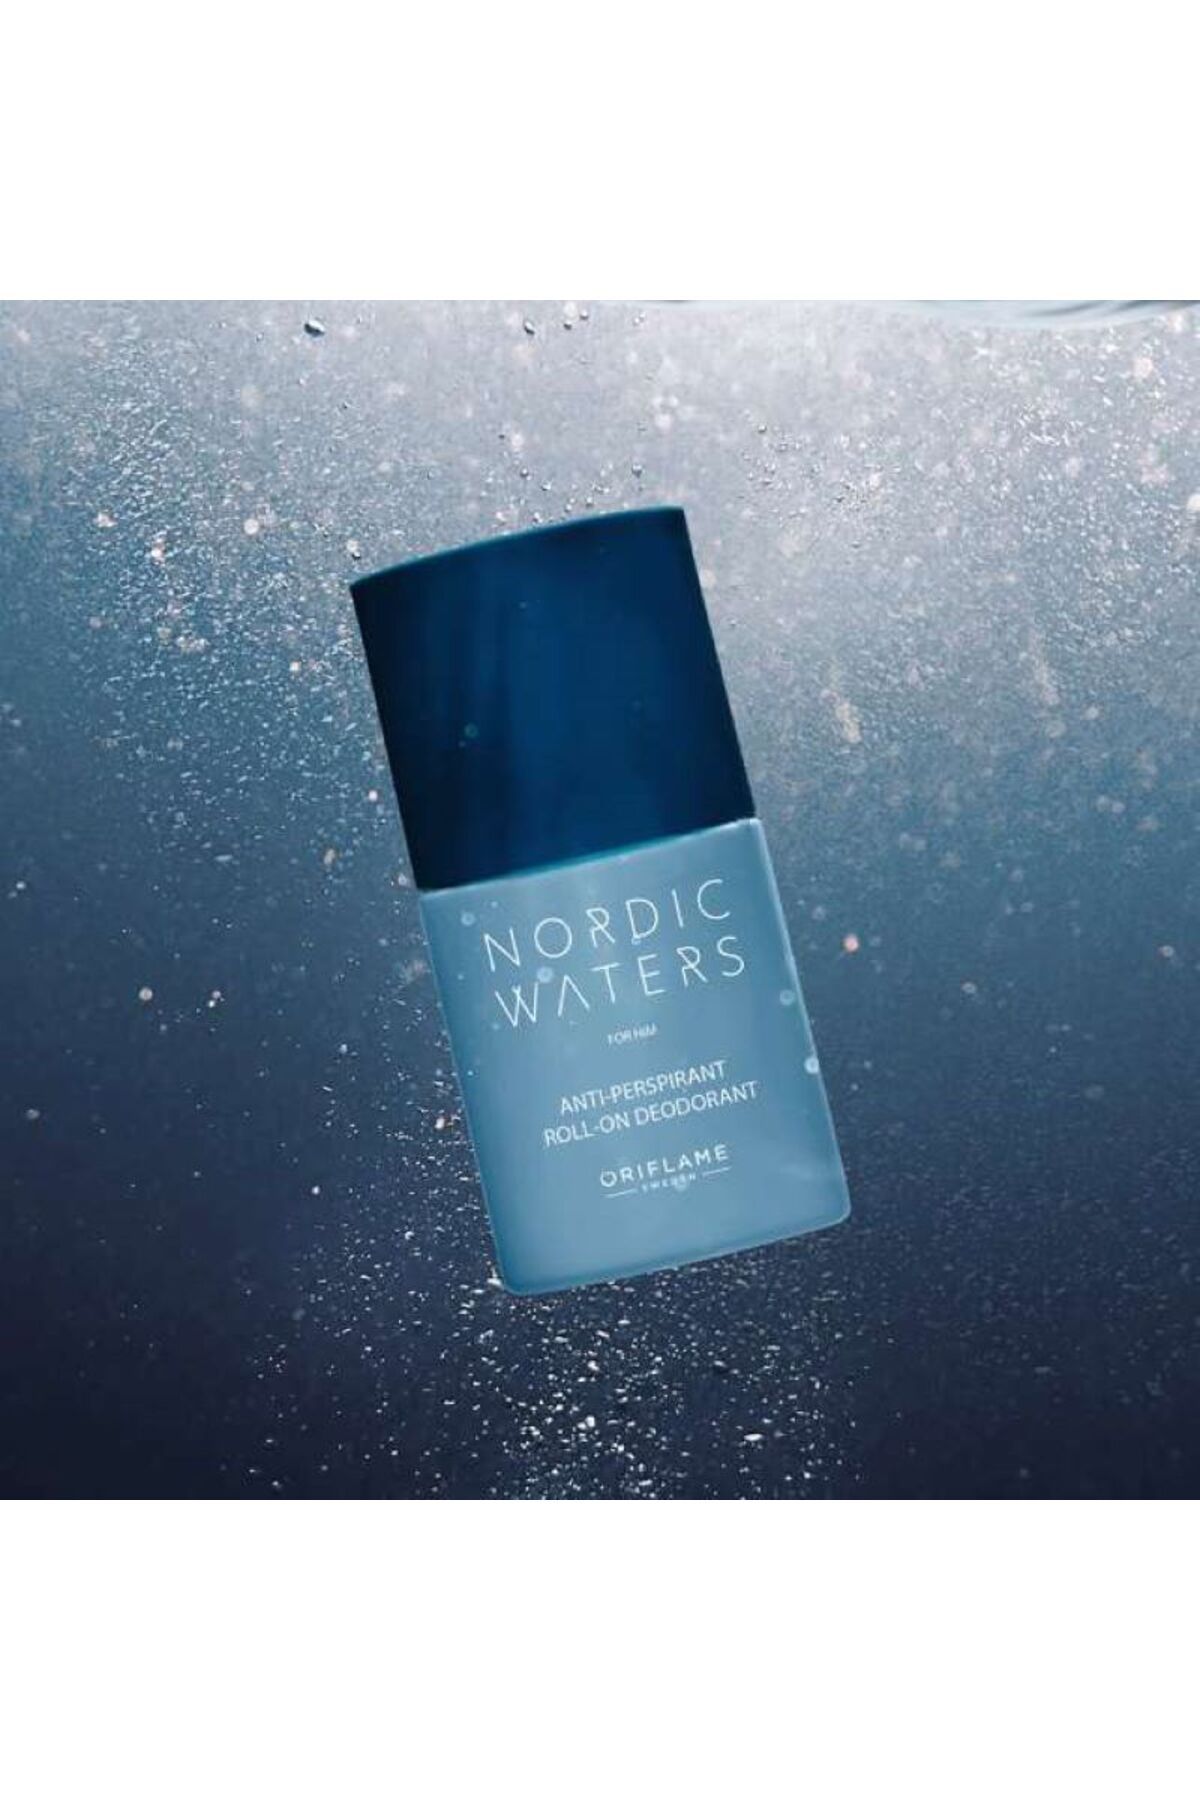 Oriflame Nordic Waters for him Anti-perspirant Roll-On Deodorant